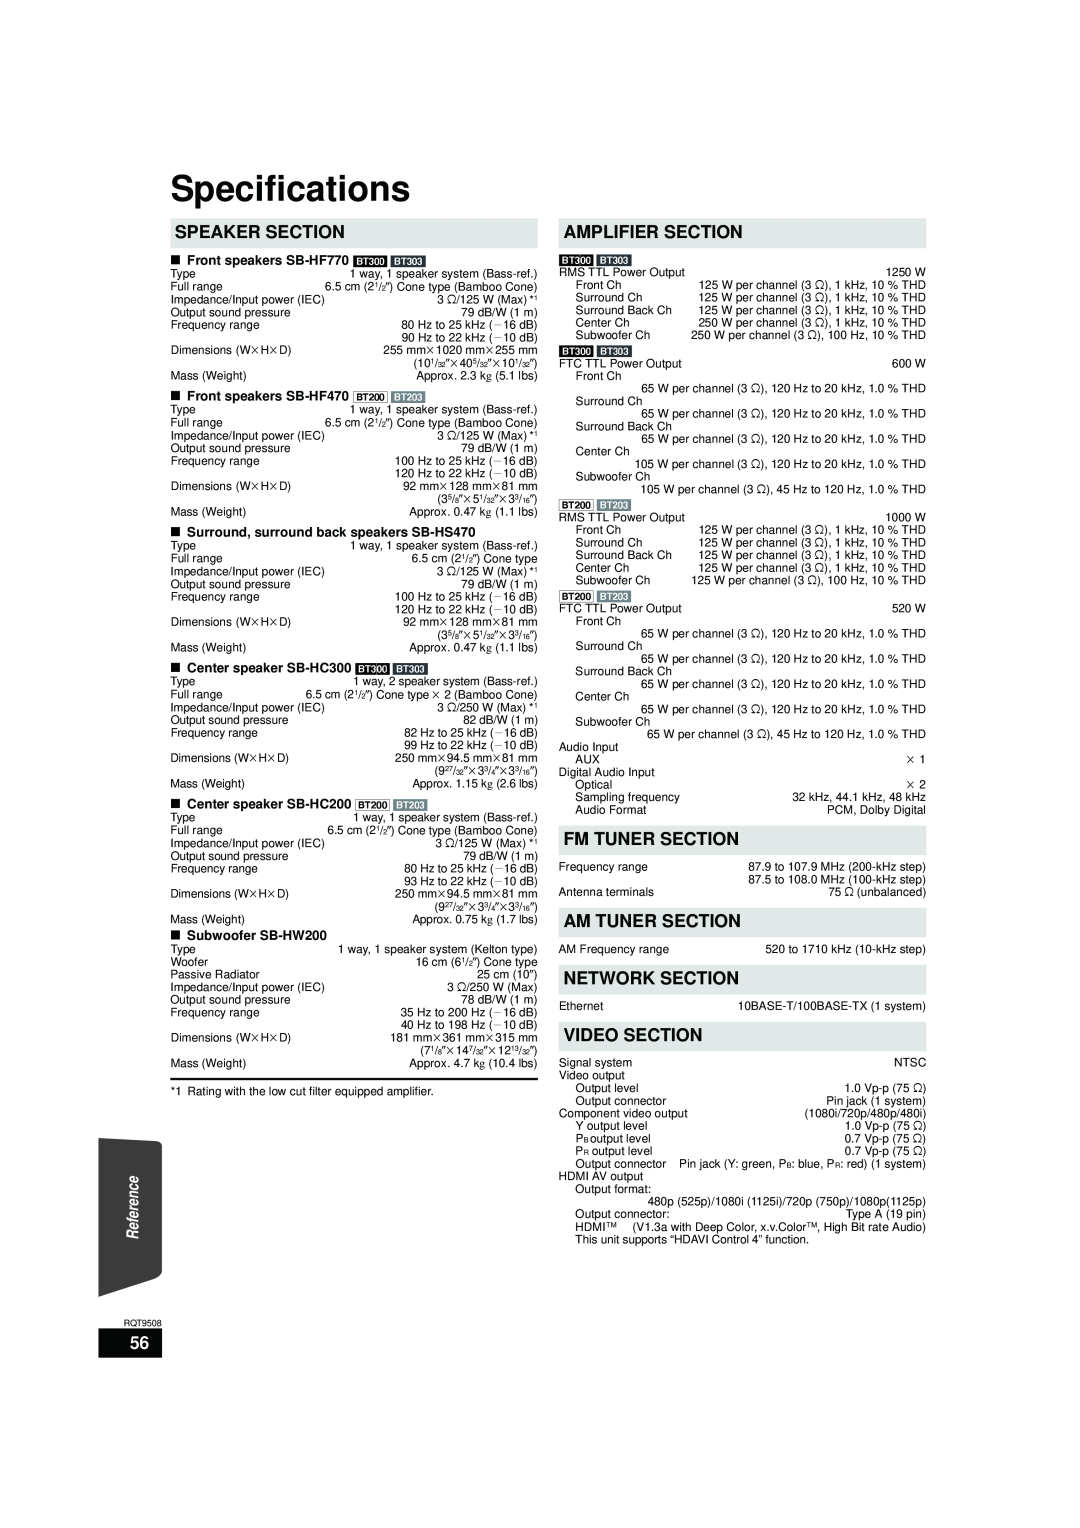 Panasonic SC-BT203 Specifications, Speaker Section, Amplifier Section, Fm Tuner Section, Am Tuner Section, Network Section 